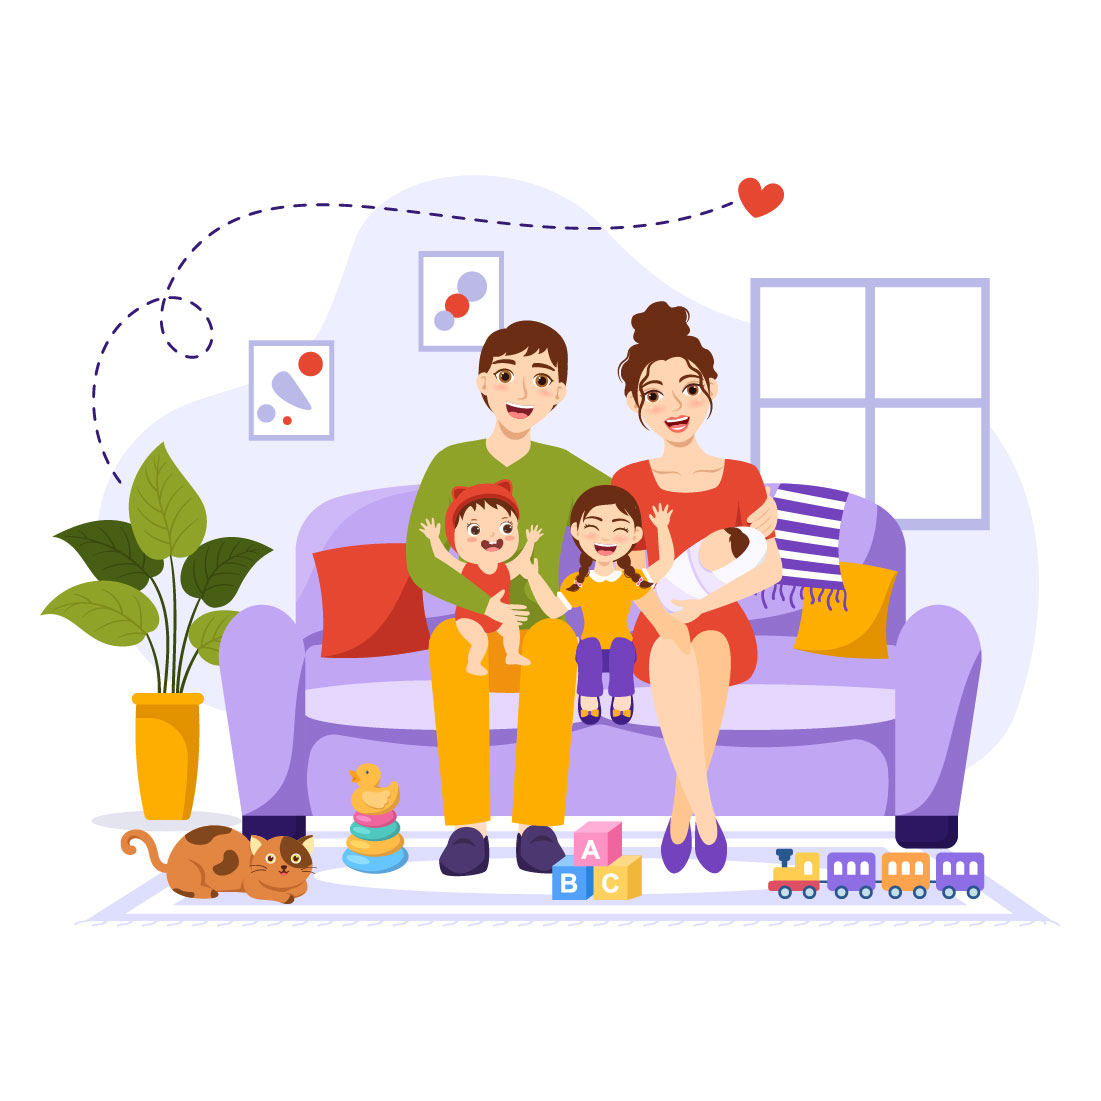 12 Family Values Vector Illustration cover image.